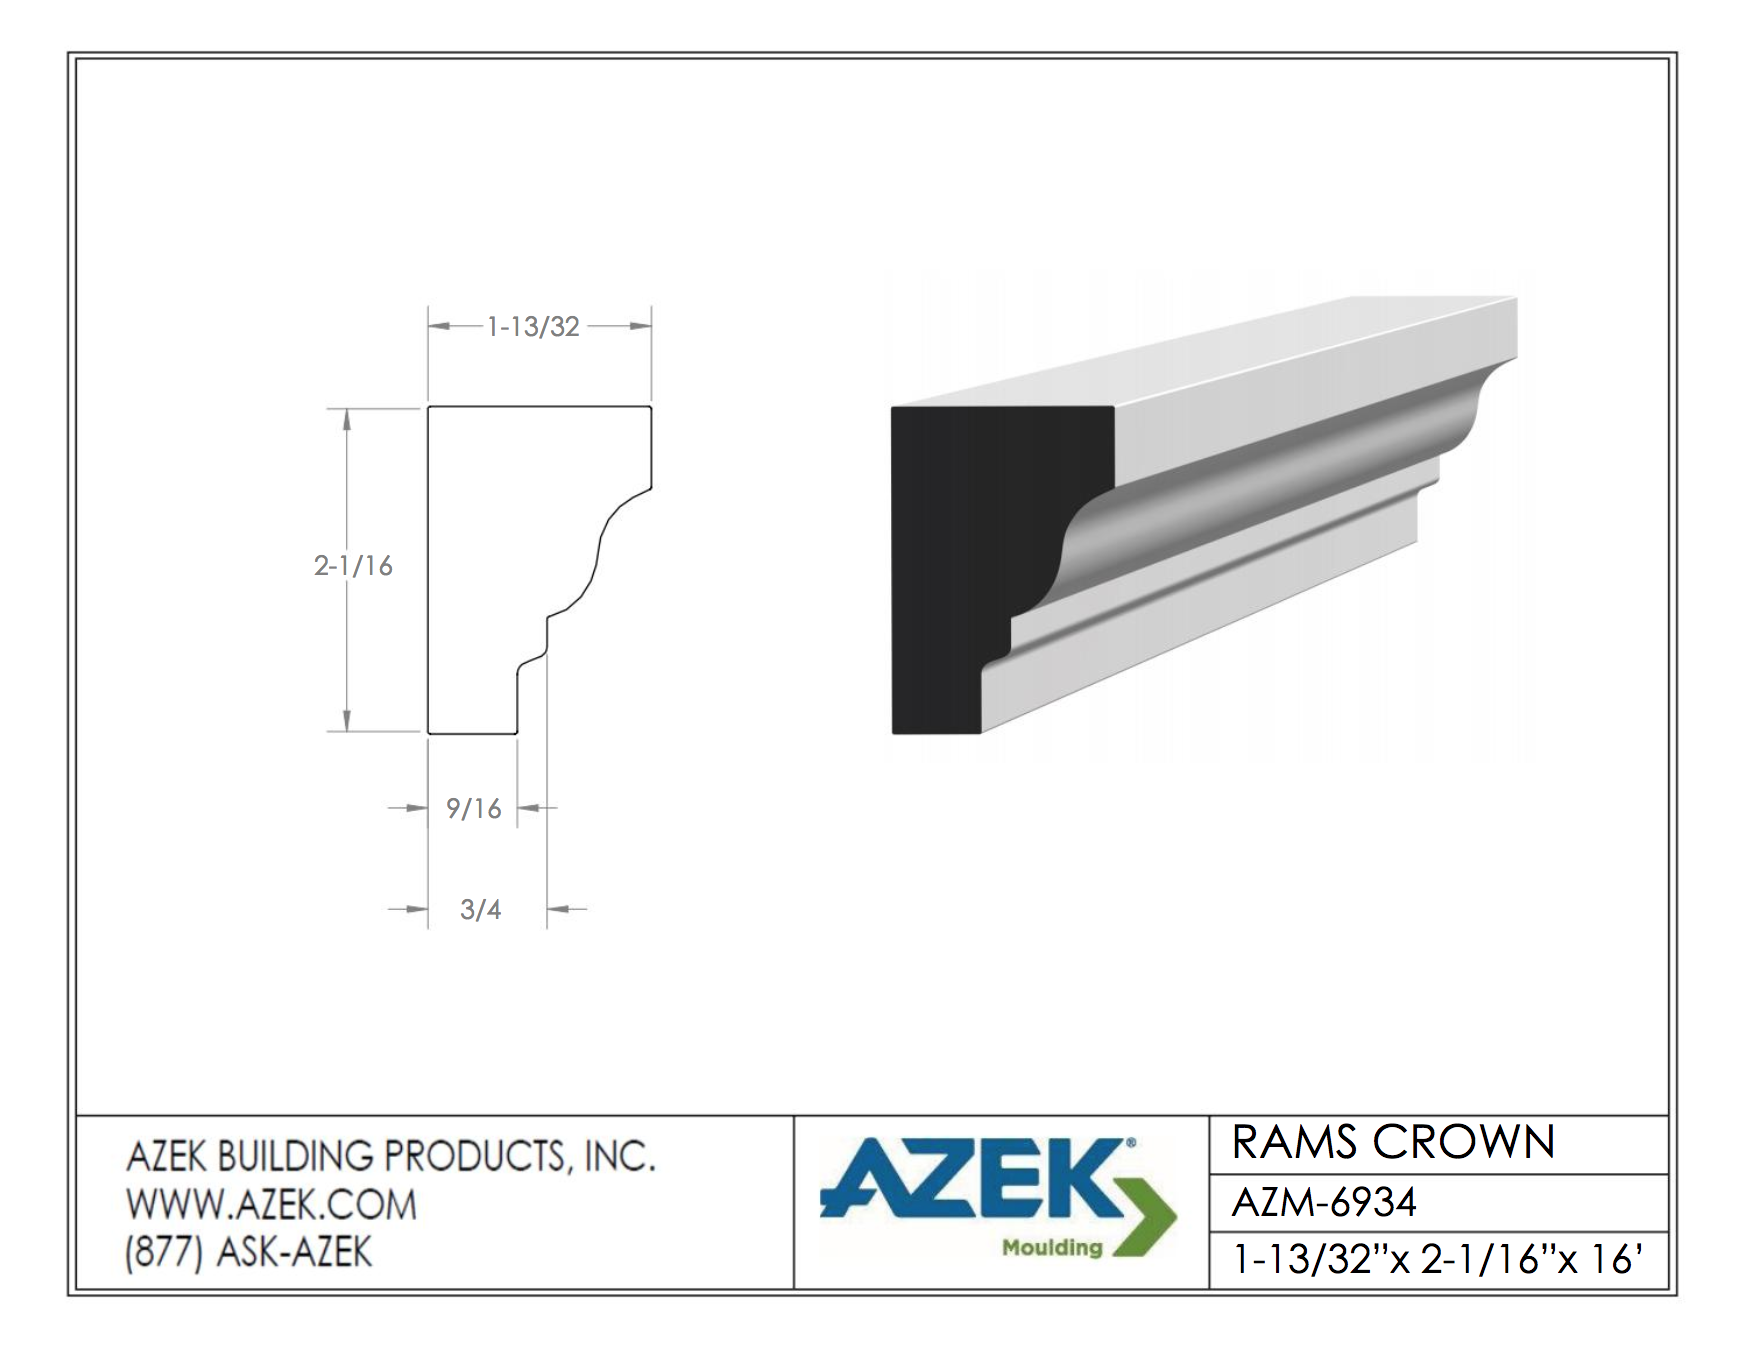 Azek Moulding Rams Crown AZM 6934 Specifications - TimberTown